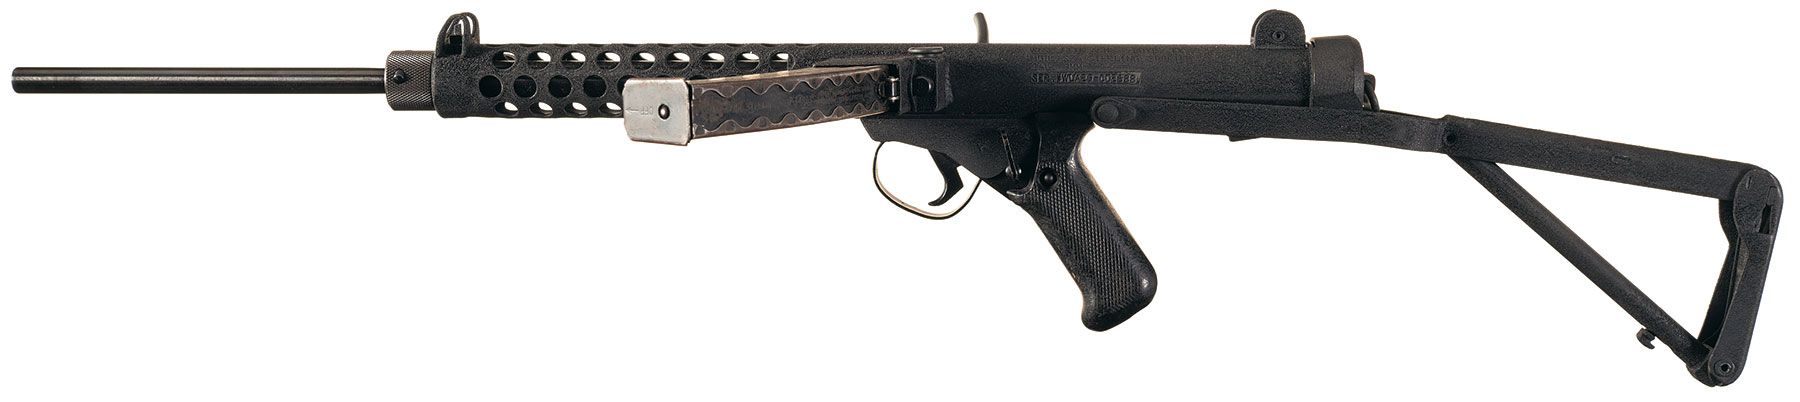 Wise-Lite Arms S/A Sterling Sporter Semi-Automatic Carbine.